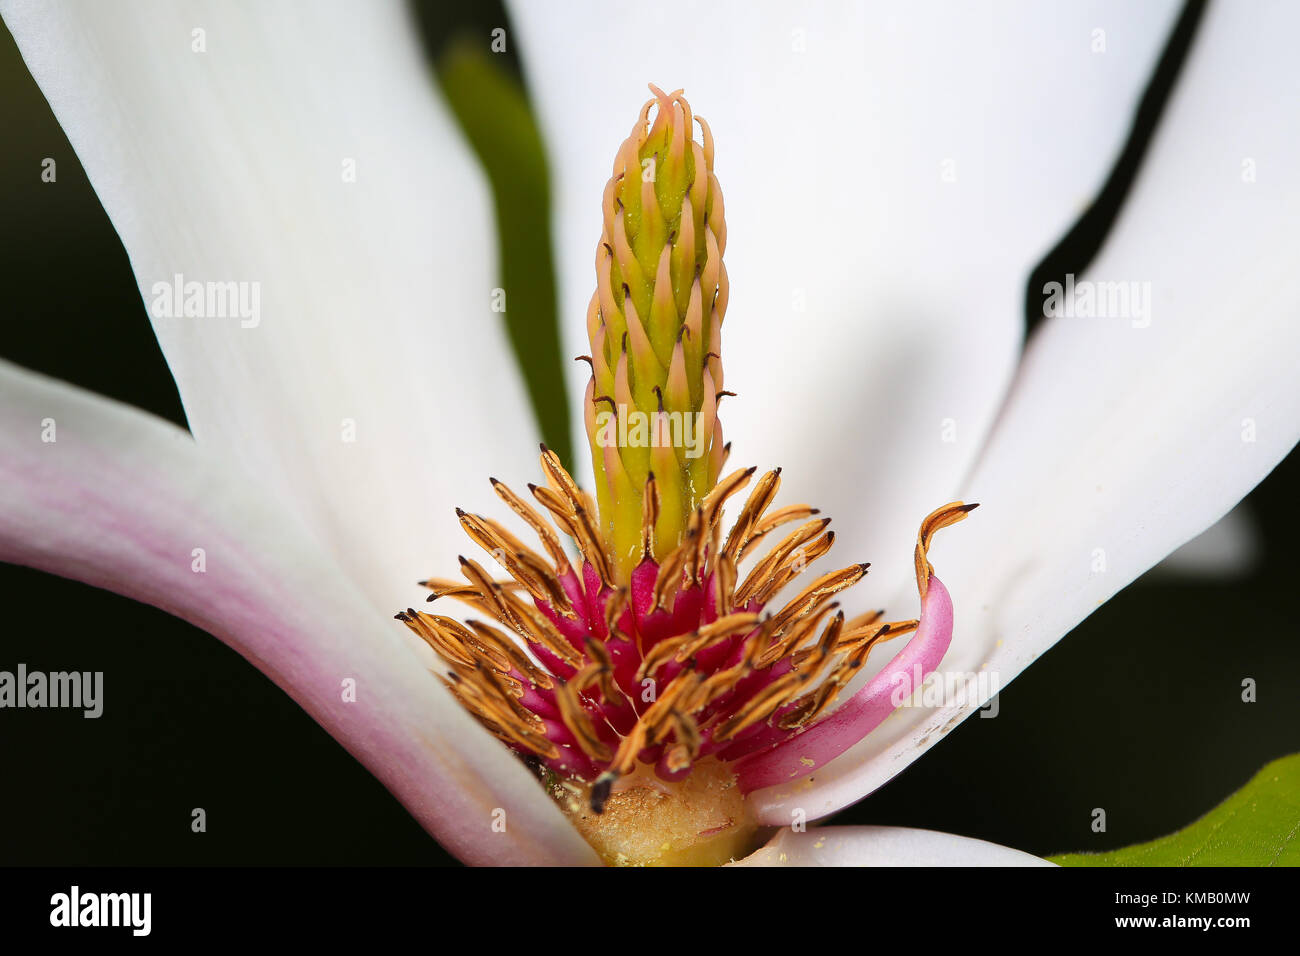 Close up of magnolia flower (x soulangeana) with large white tepals open wide revealing plant reproductive parts as the centre focus. Stock Photo